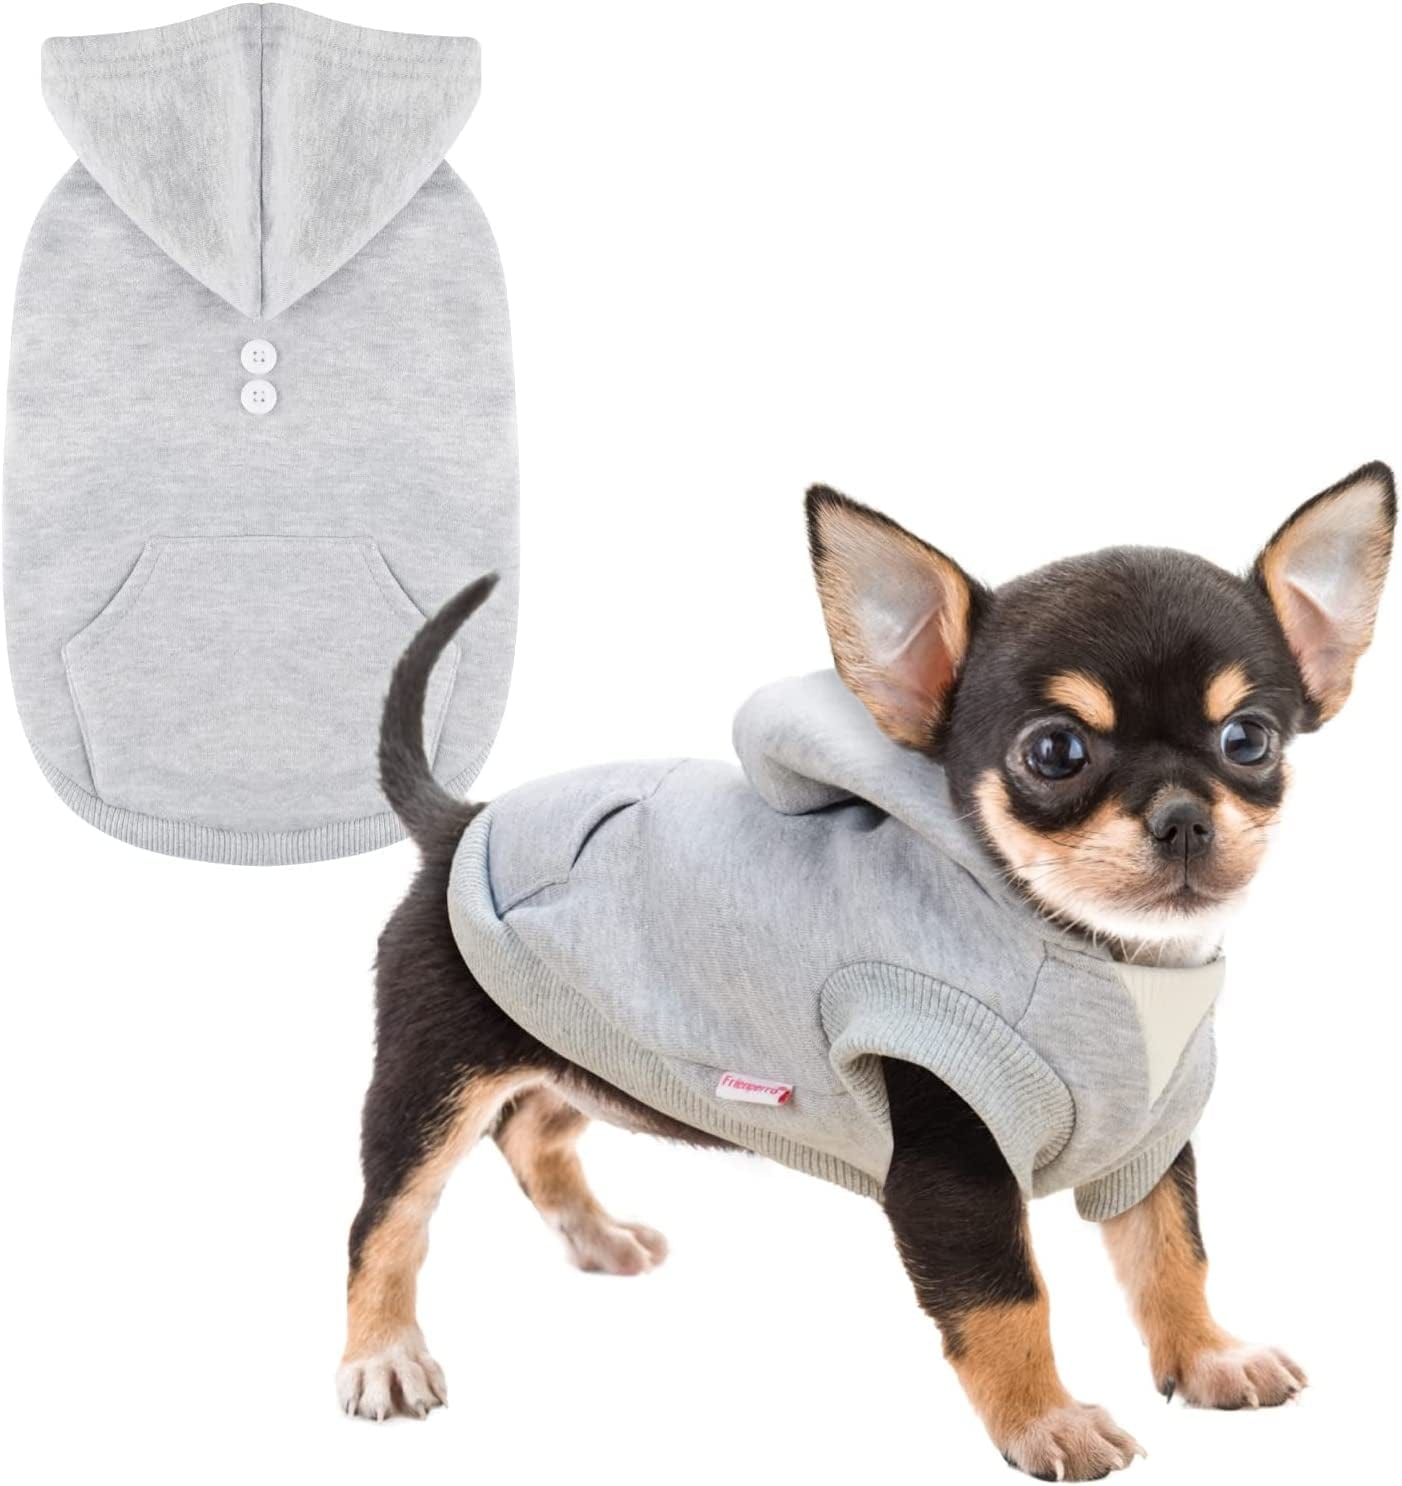 𝐍𝐄𝐖 𝐀𝐑𝐑𝐈𝐕𝐀𝐋 Frienperro Dog Clothes for Small Dogs Girl Boy, 100% Cotton Buffalo Plaid Small Dog Hoodie, Chihuahua Clothes Pet Cat Winter Warm Sweatshirt Sweater, Teacup Yorkie Puppy Coat Animals & Pet Supplies > Pet Supplies > Dog Supplies > Dog Apparel Frienperro Grey XXX-Small 